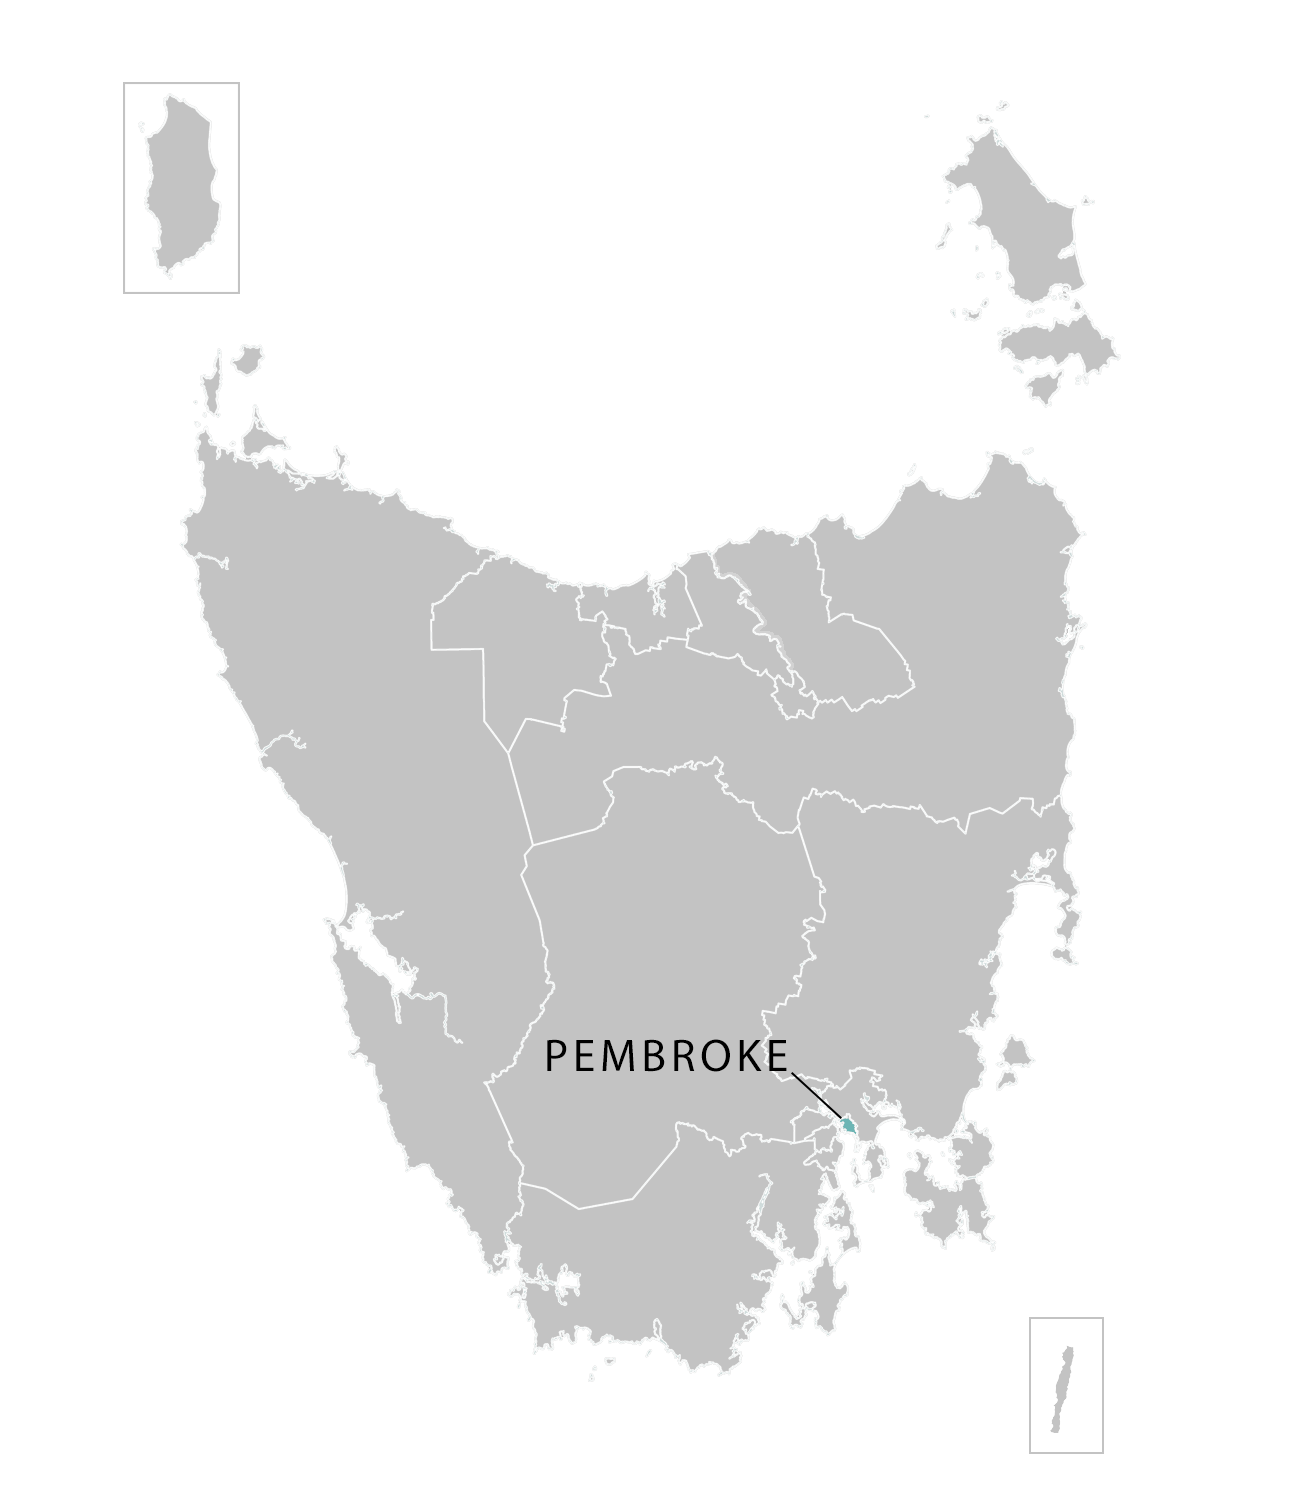 Pembroke division highlighted on illustrated map of Tasmania